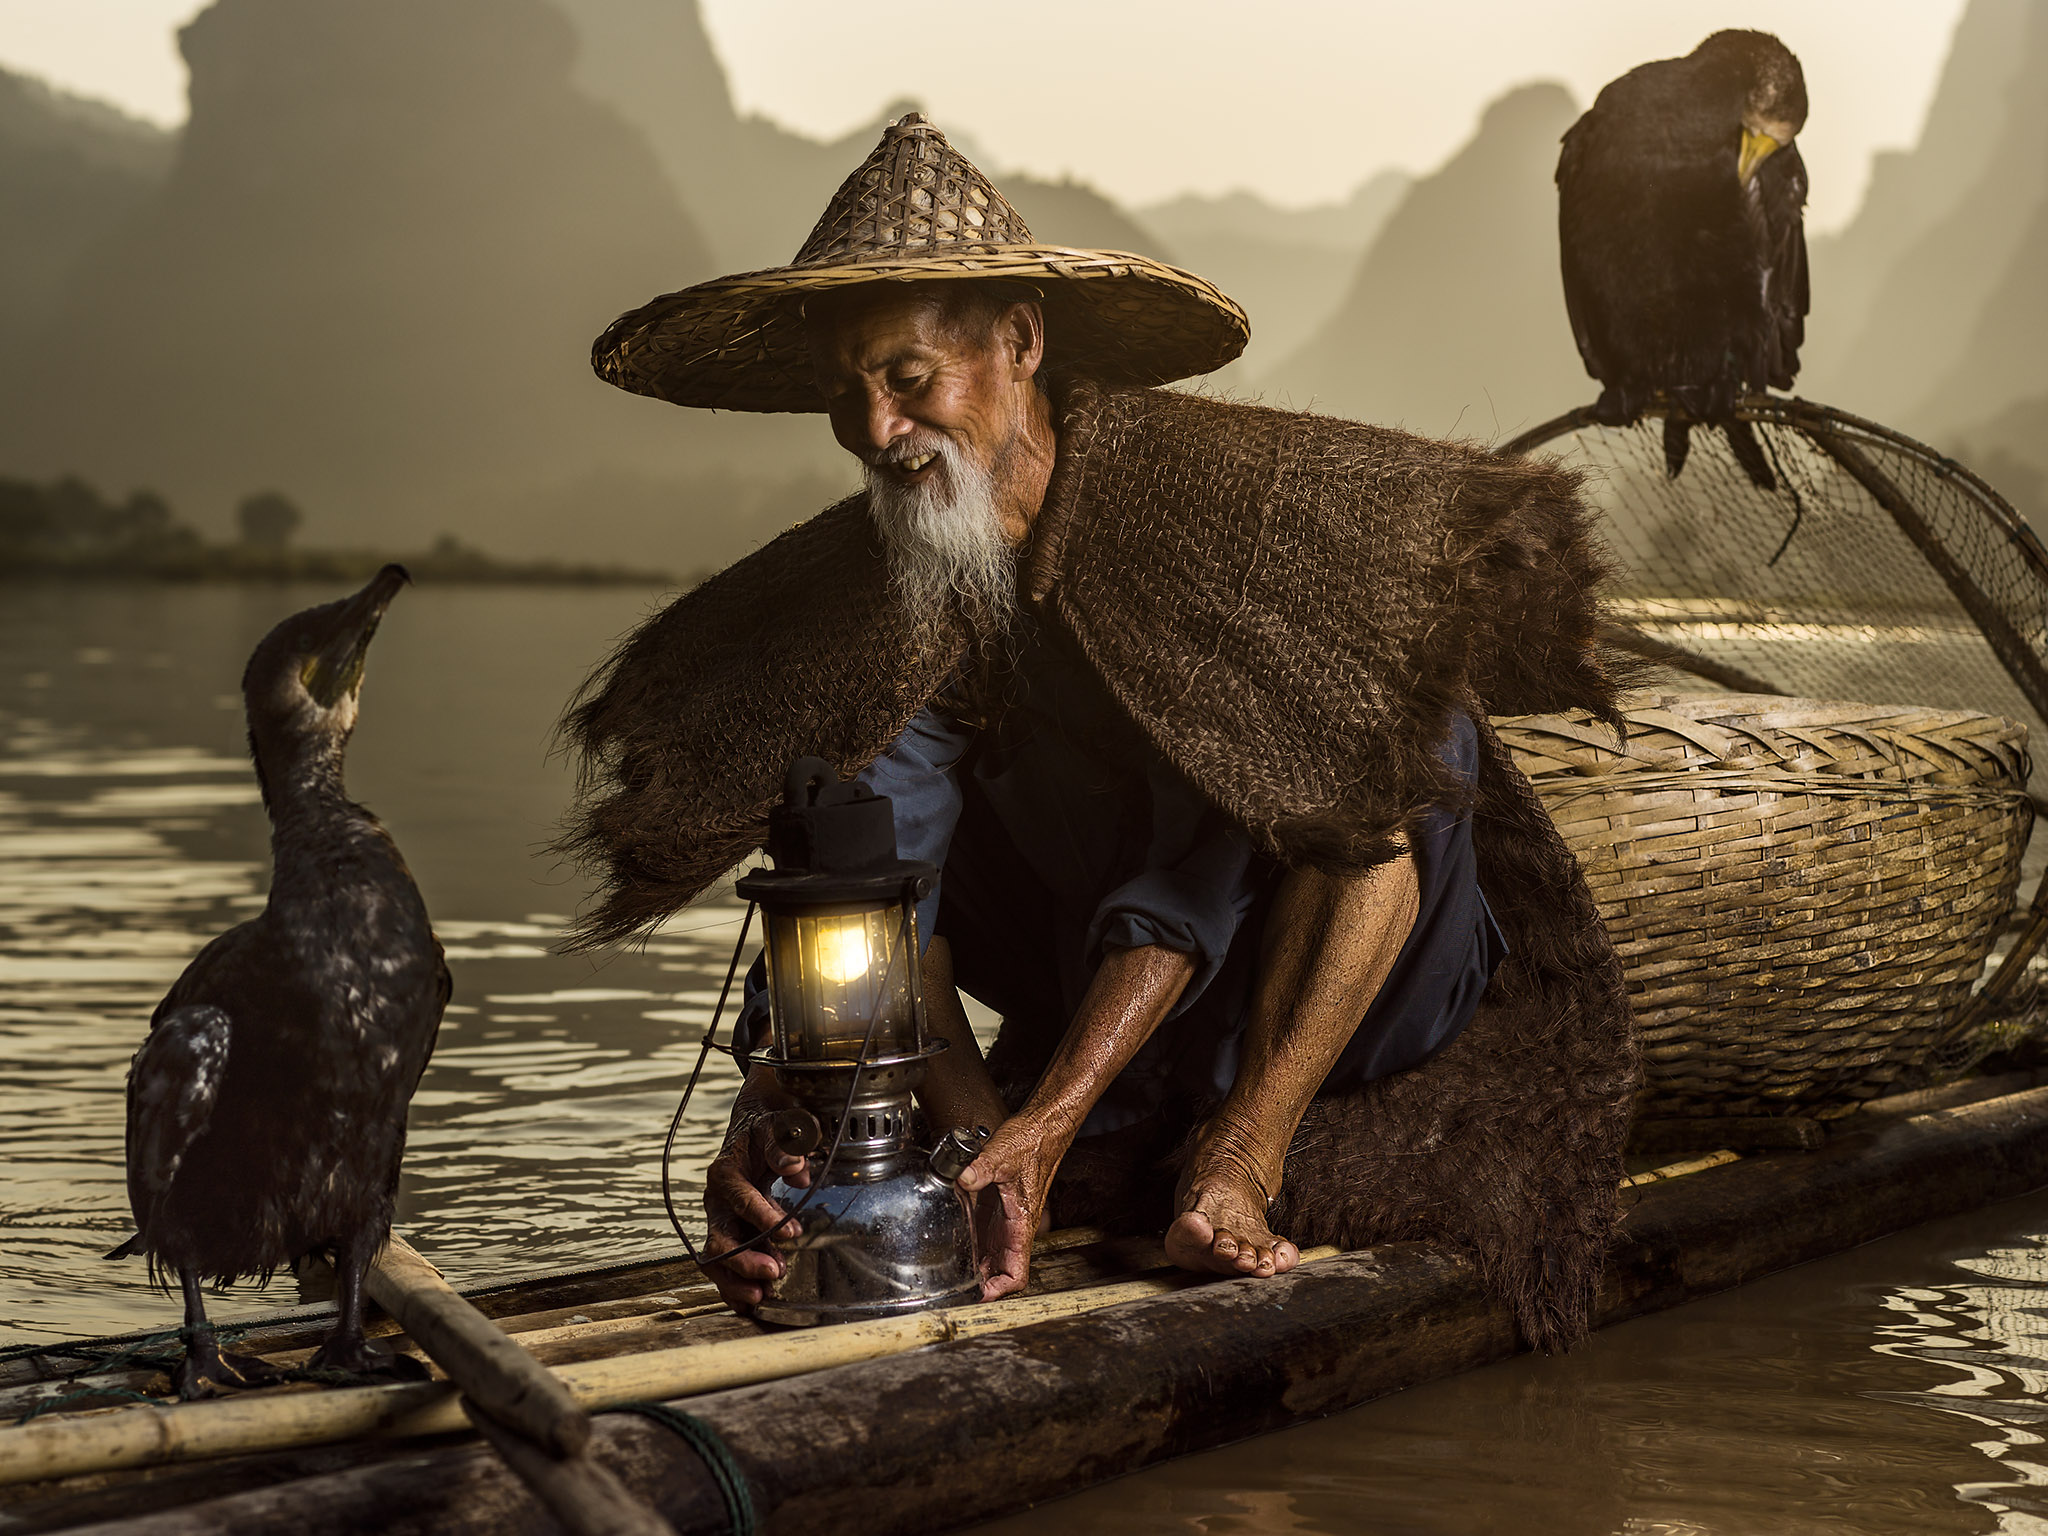 Mr. Huang Trains his birds to help him fishing, every day still fishes for his family